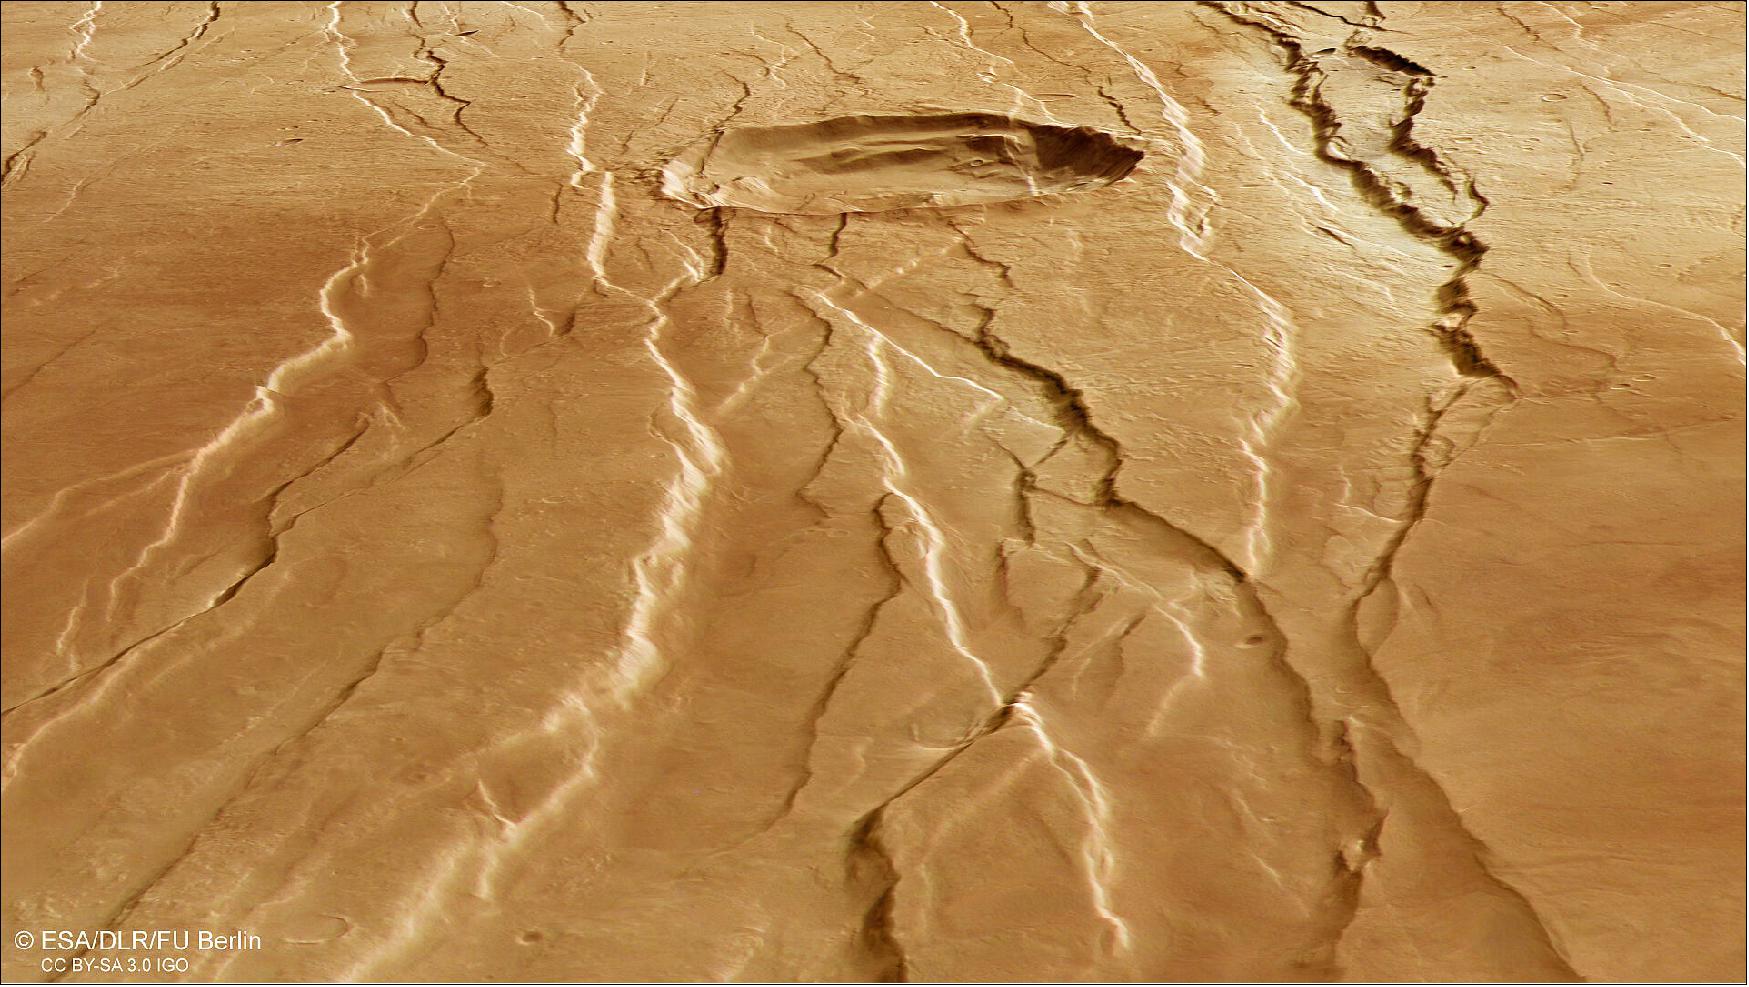 Figure 19: Second perspective view of Tantalus Fossae. This oblique perspective view of Tantalus Fossae on Mars was generated from the digital terrain model and the nadir and colour channels of the High Resolution Stereo Camera on ESA’s Mars Express (image credit: ESA/DLR/FU Berlin, CC BY-SA 3.0 IGO)